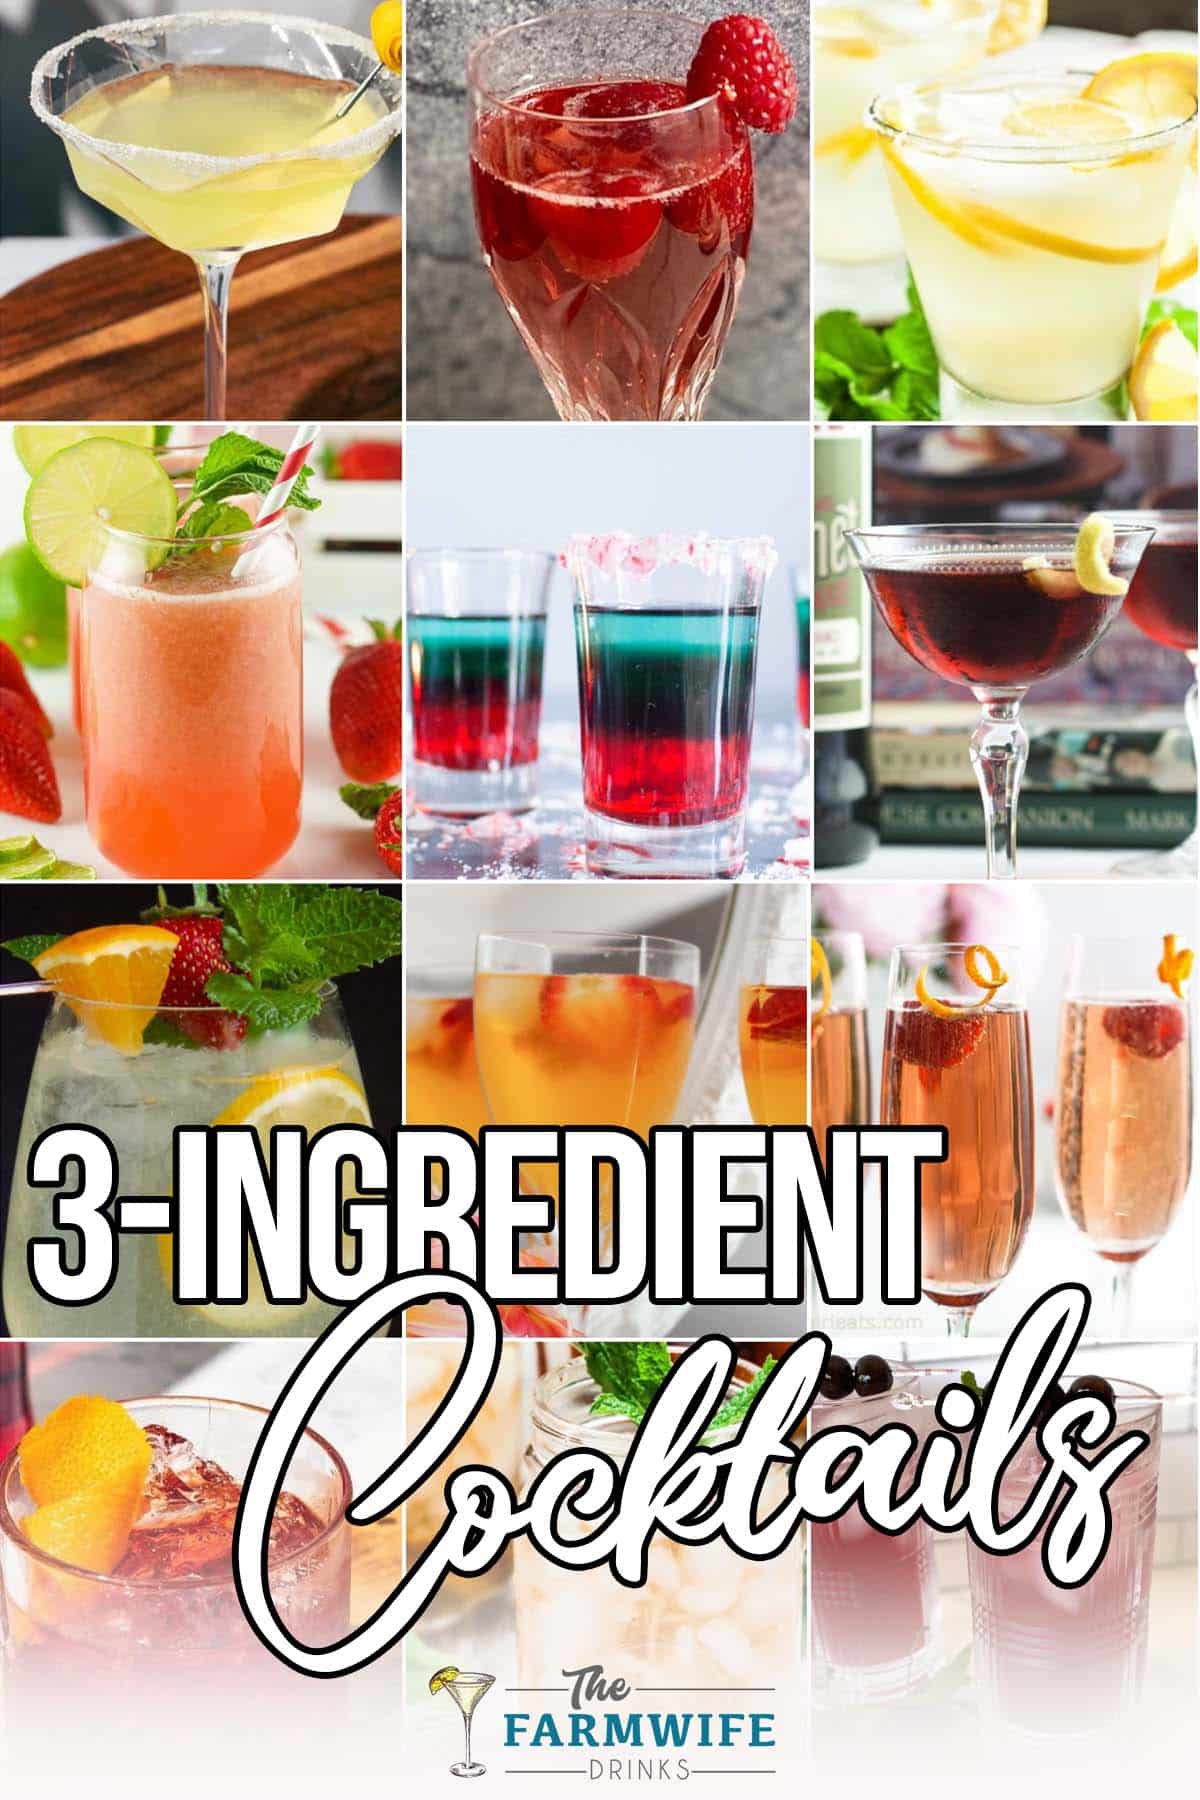 photo collage of mixed drinks using 3 ingredients with text which reads 3 ingredient cocktails